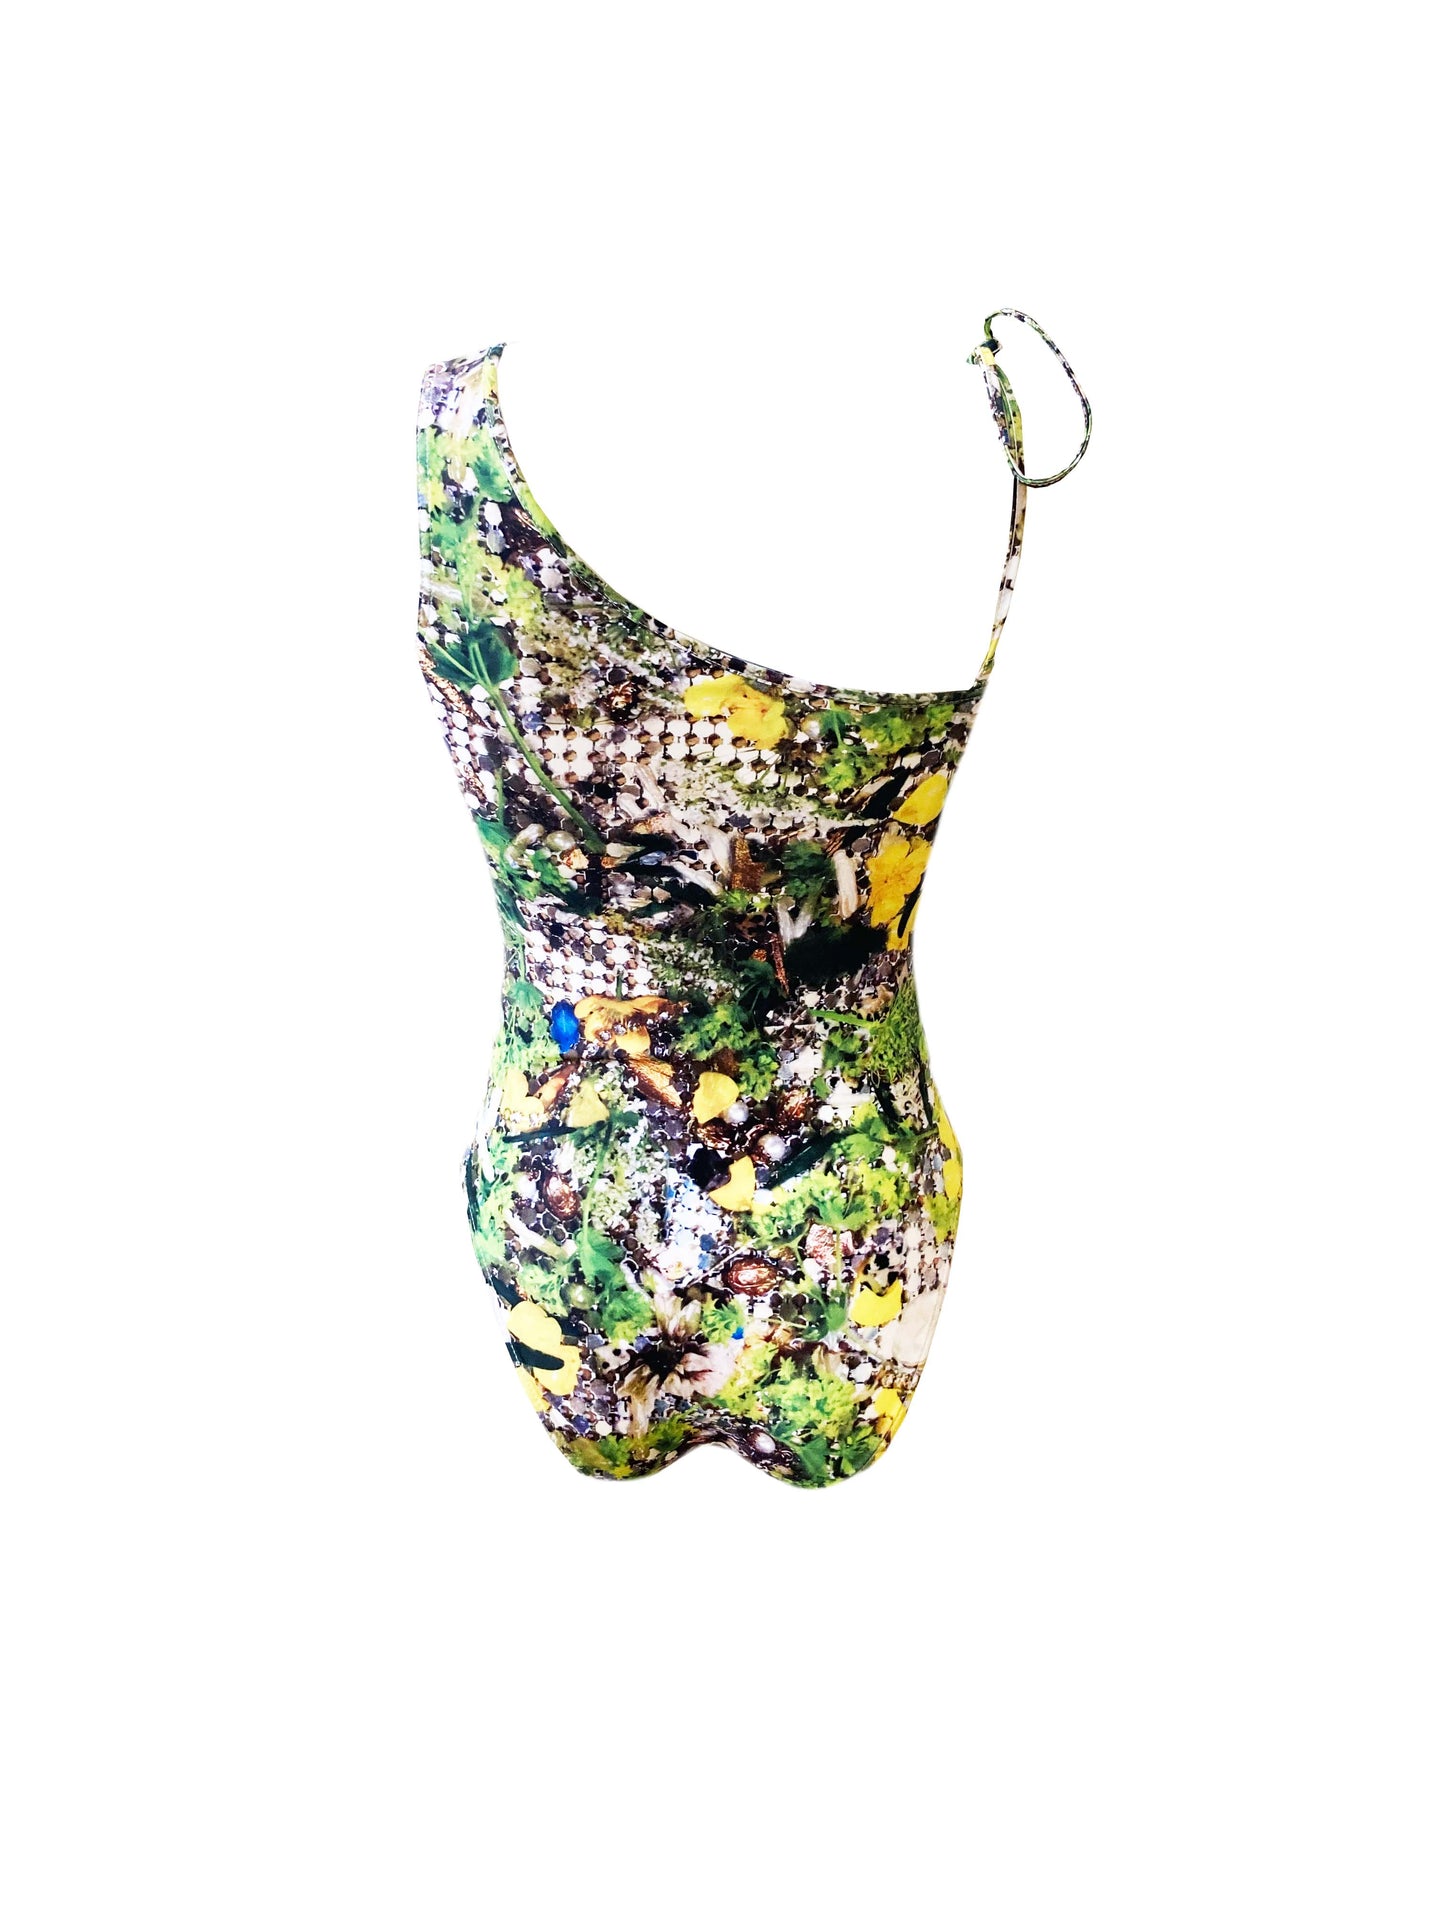 The Silver Sóley Swimsuit